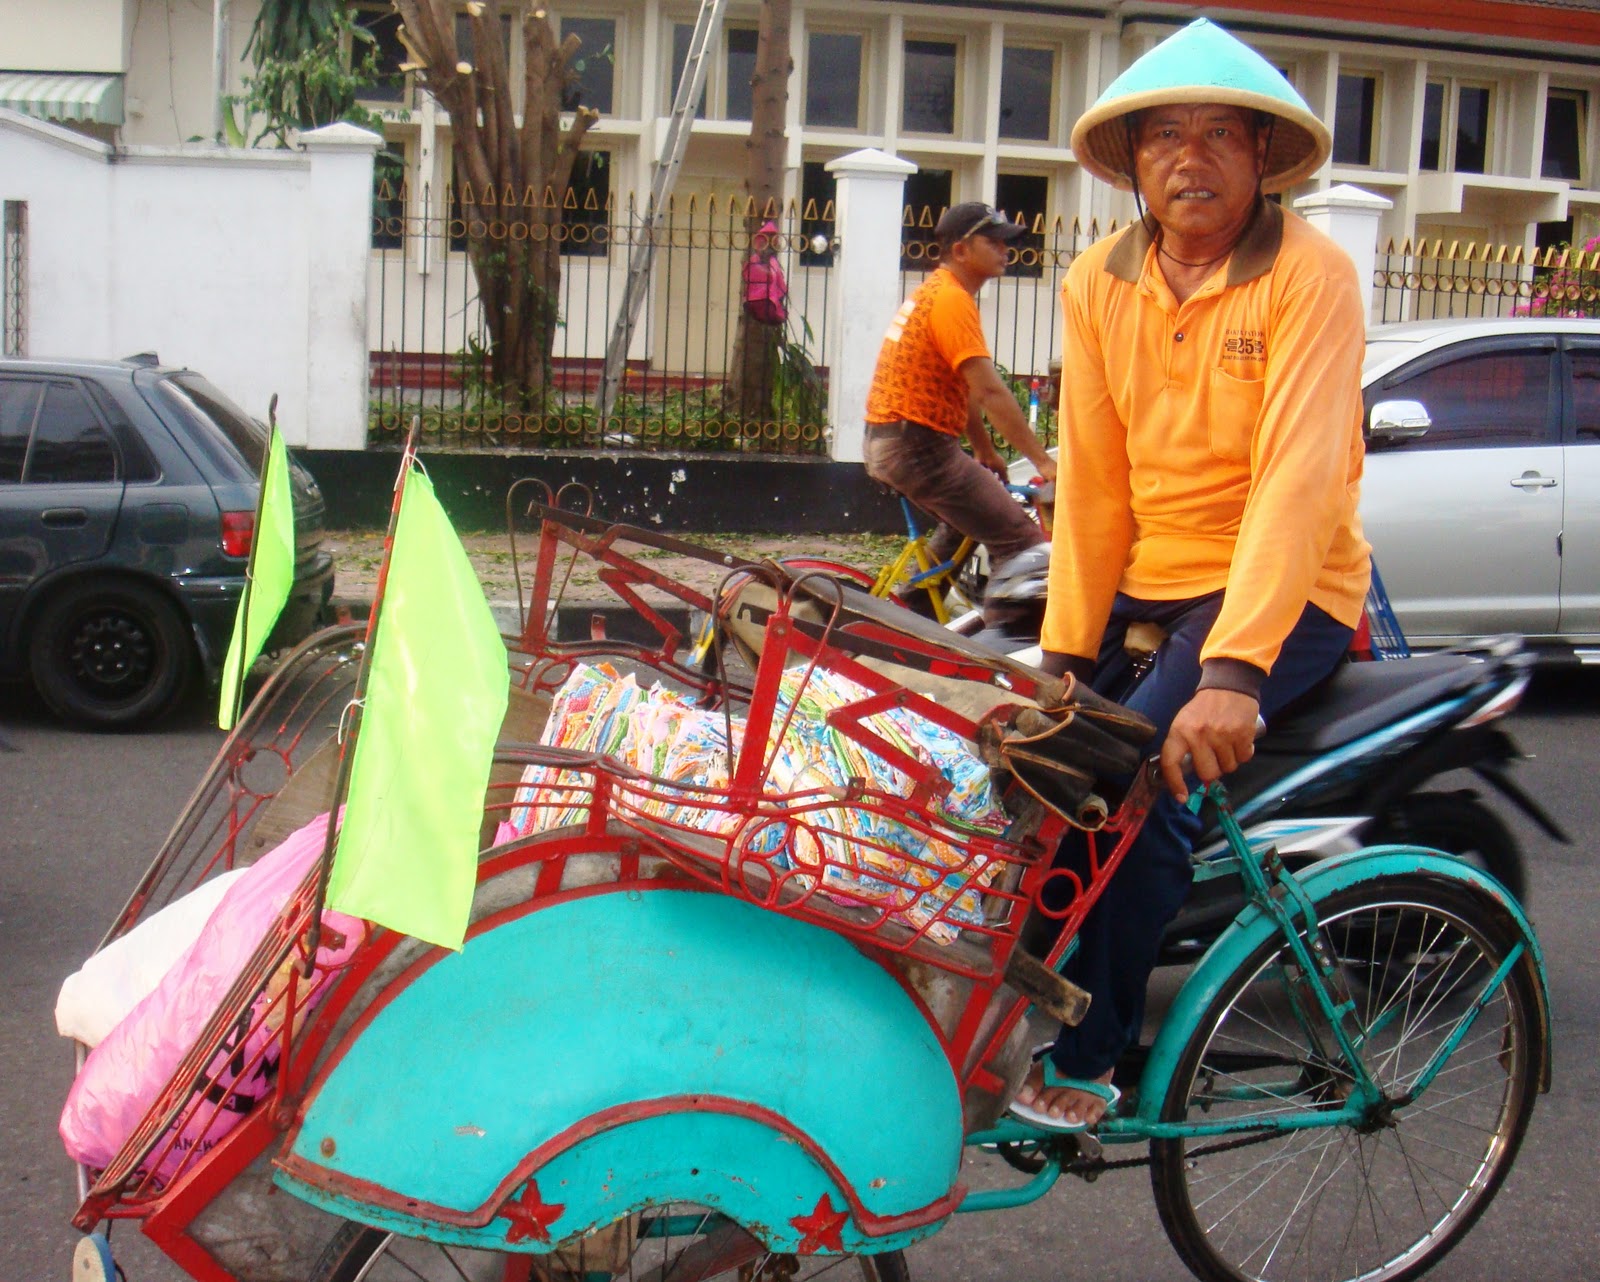 My Days In Indonesia: A Cycle Rickshaw Called Becak